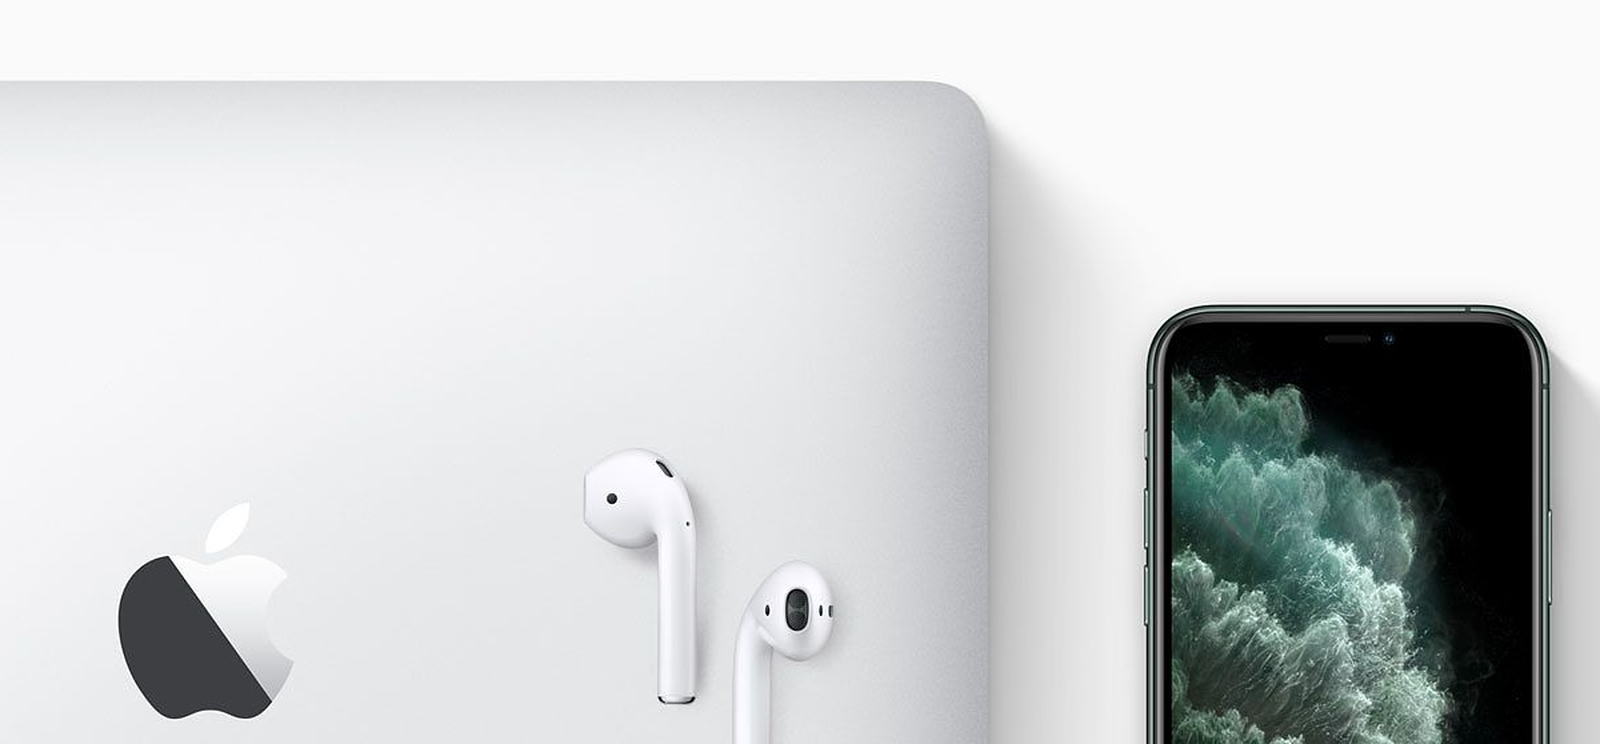 AirPods: How to Automatically Switch Between Devices - MacRumors